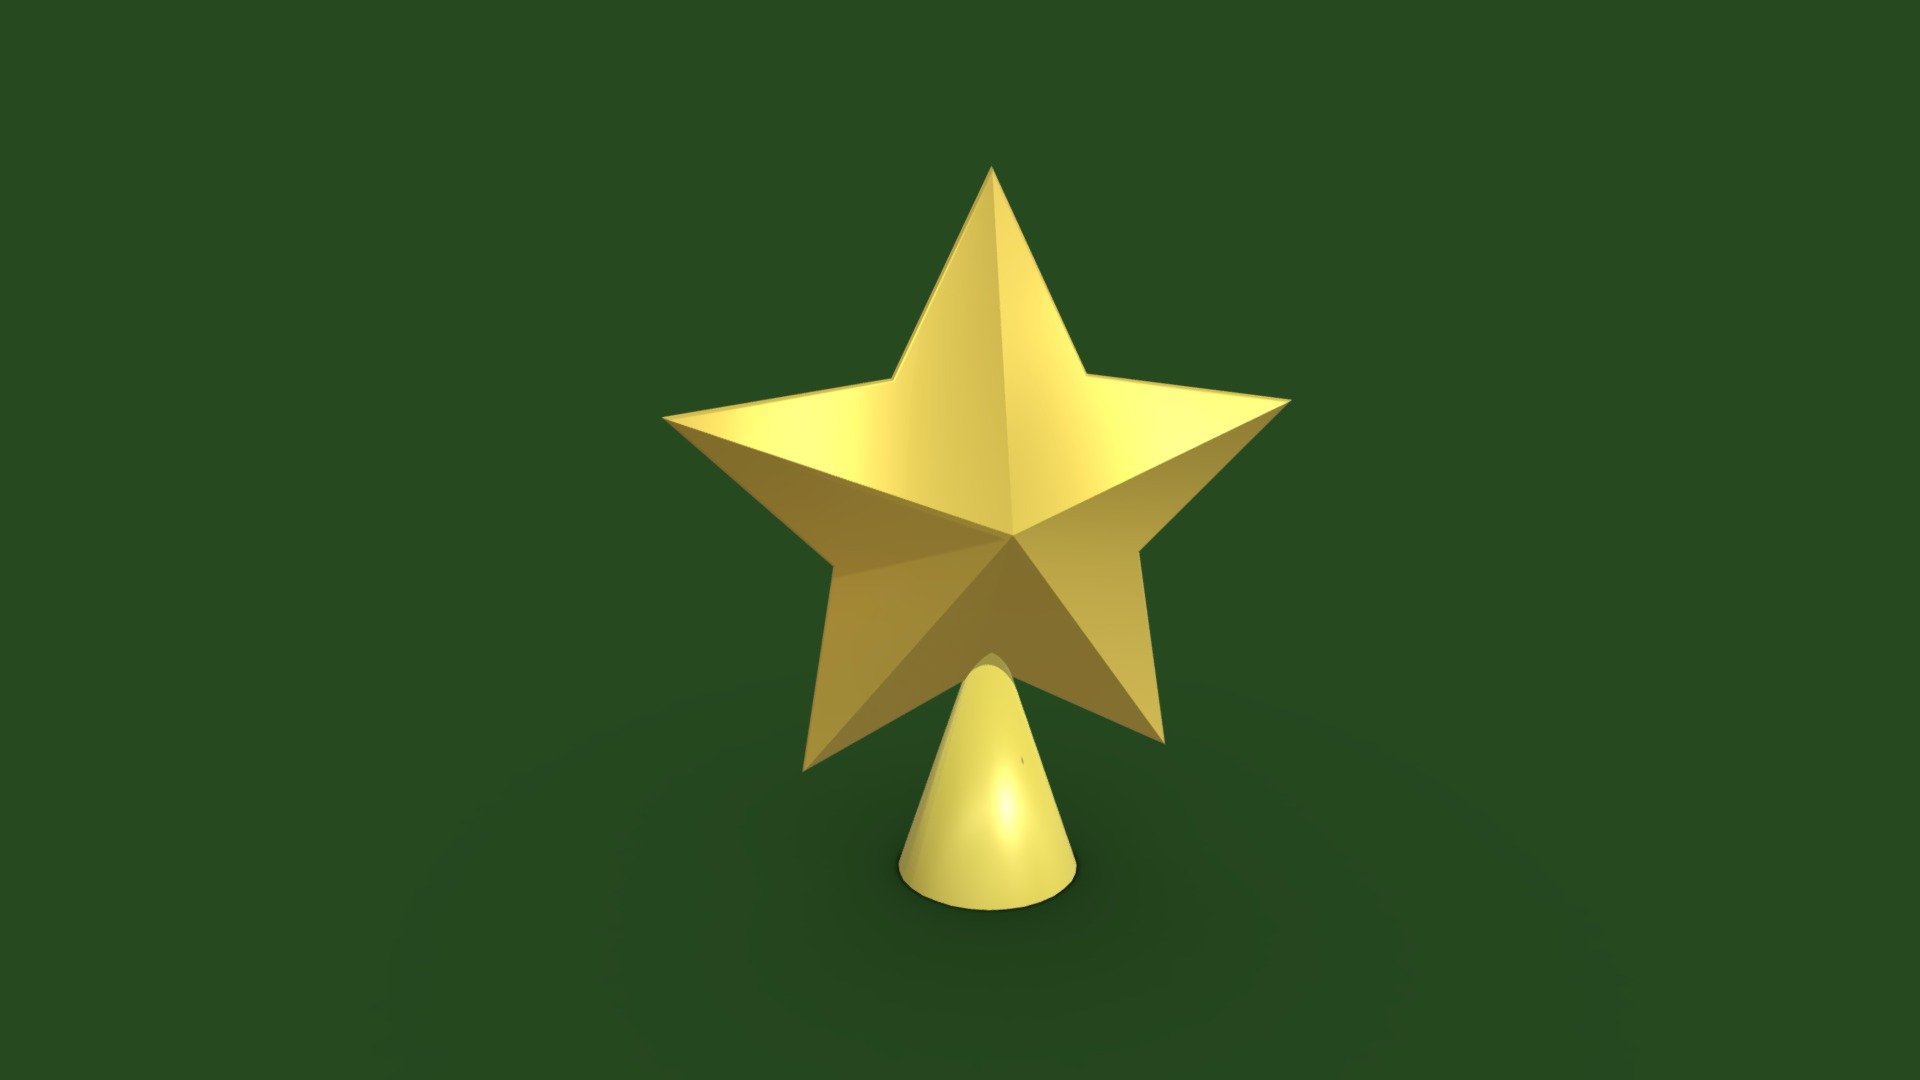 I didn't really get to make a proper Christmas tree model like I was hoping I'd have time to, so here's a simple Christmas star tree topper 3d model